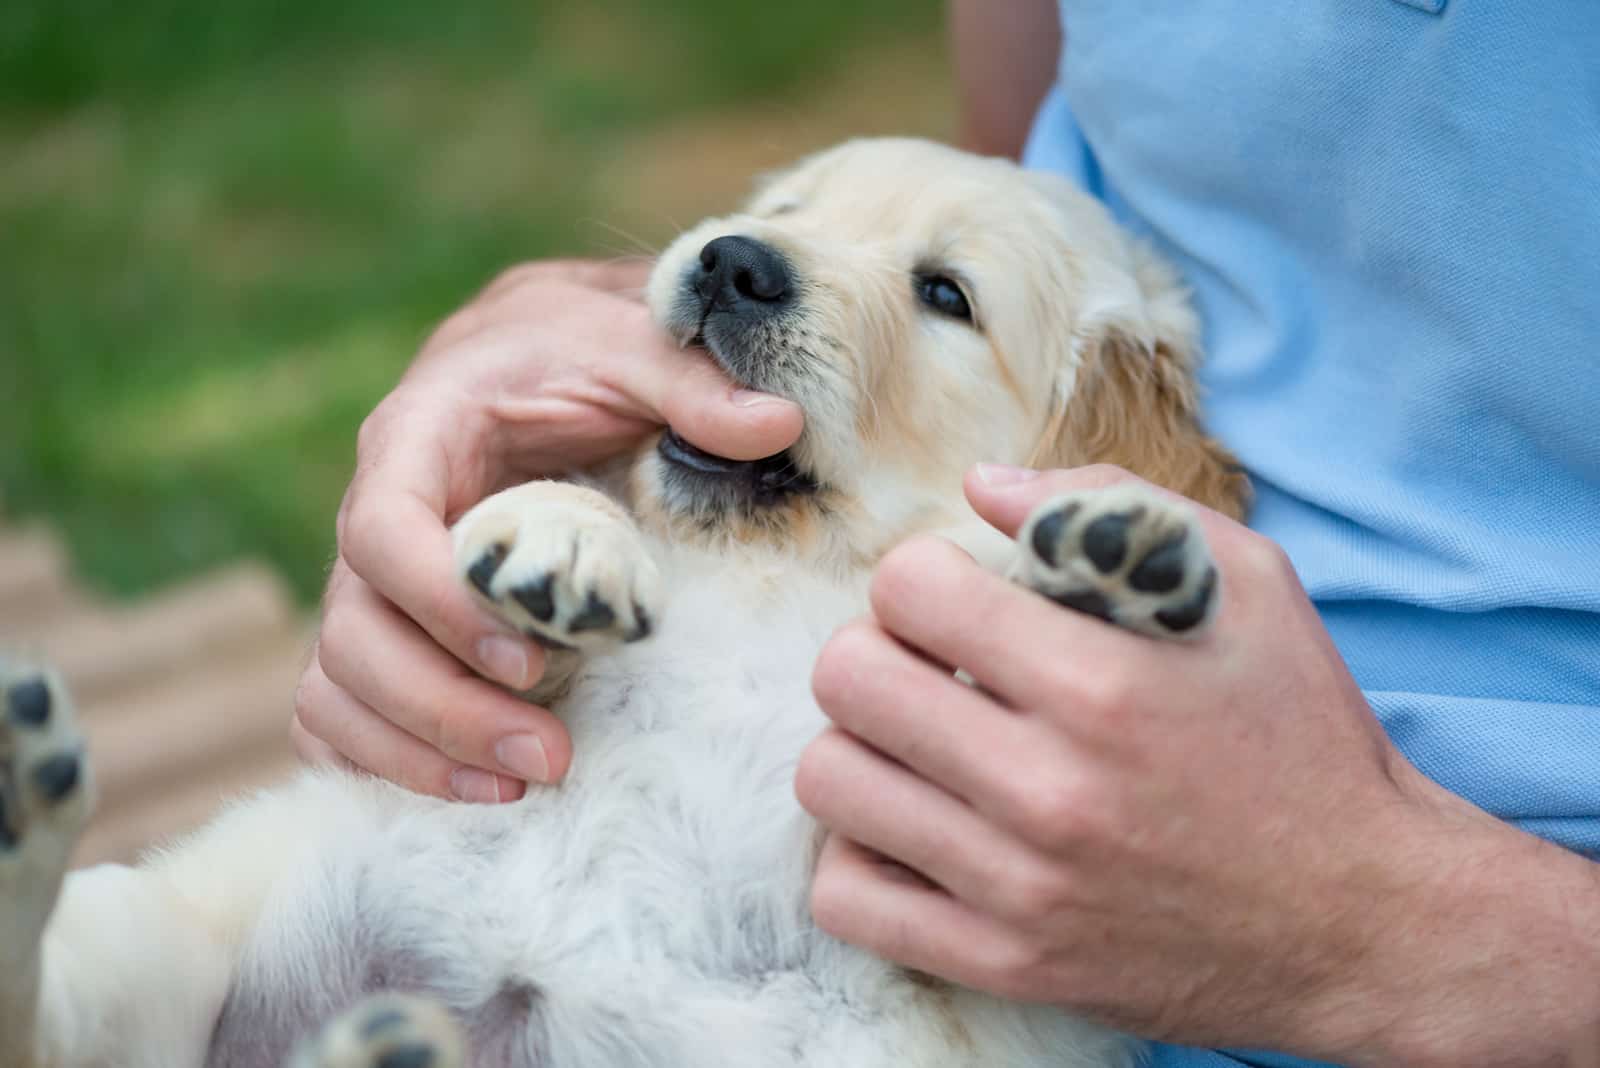 Why Does My Dog Nibble On Me? Dog Mouthing Behavior Explained